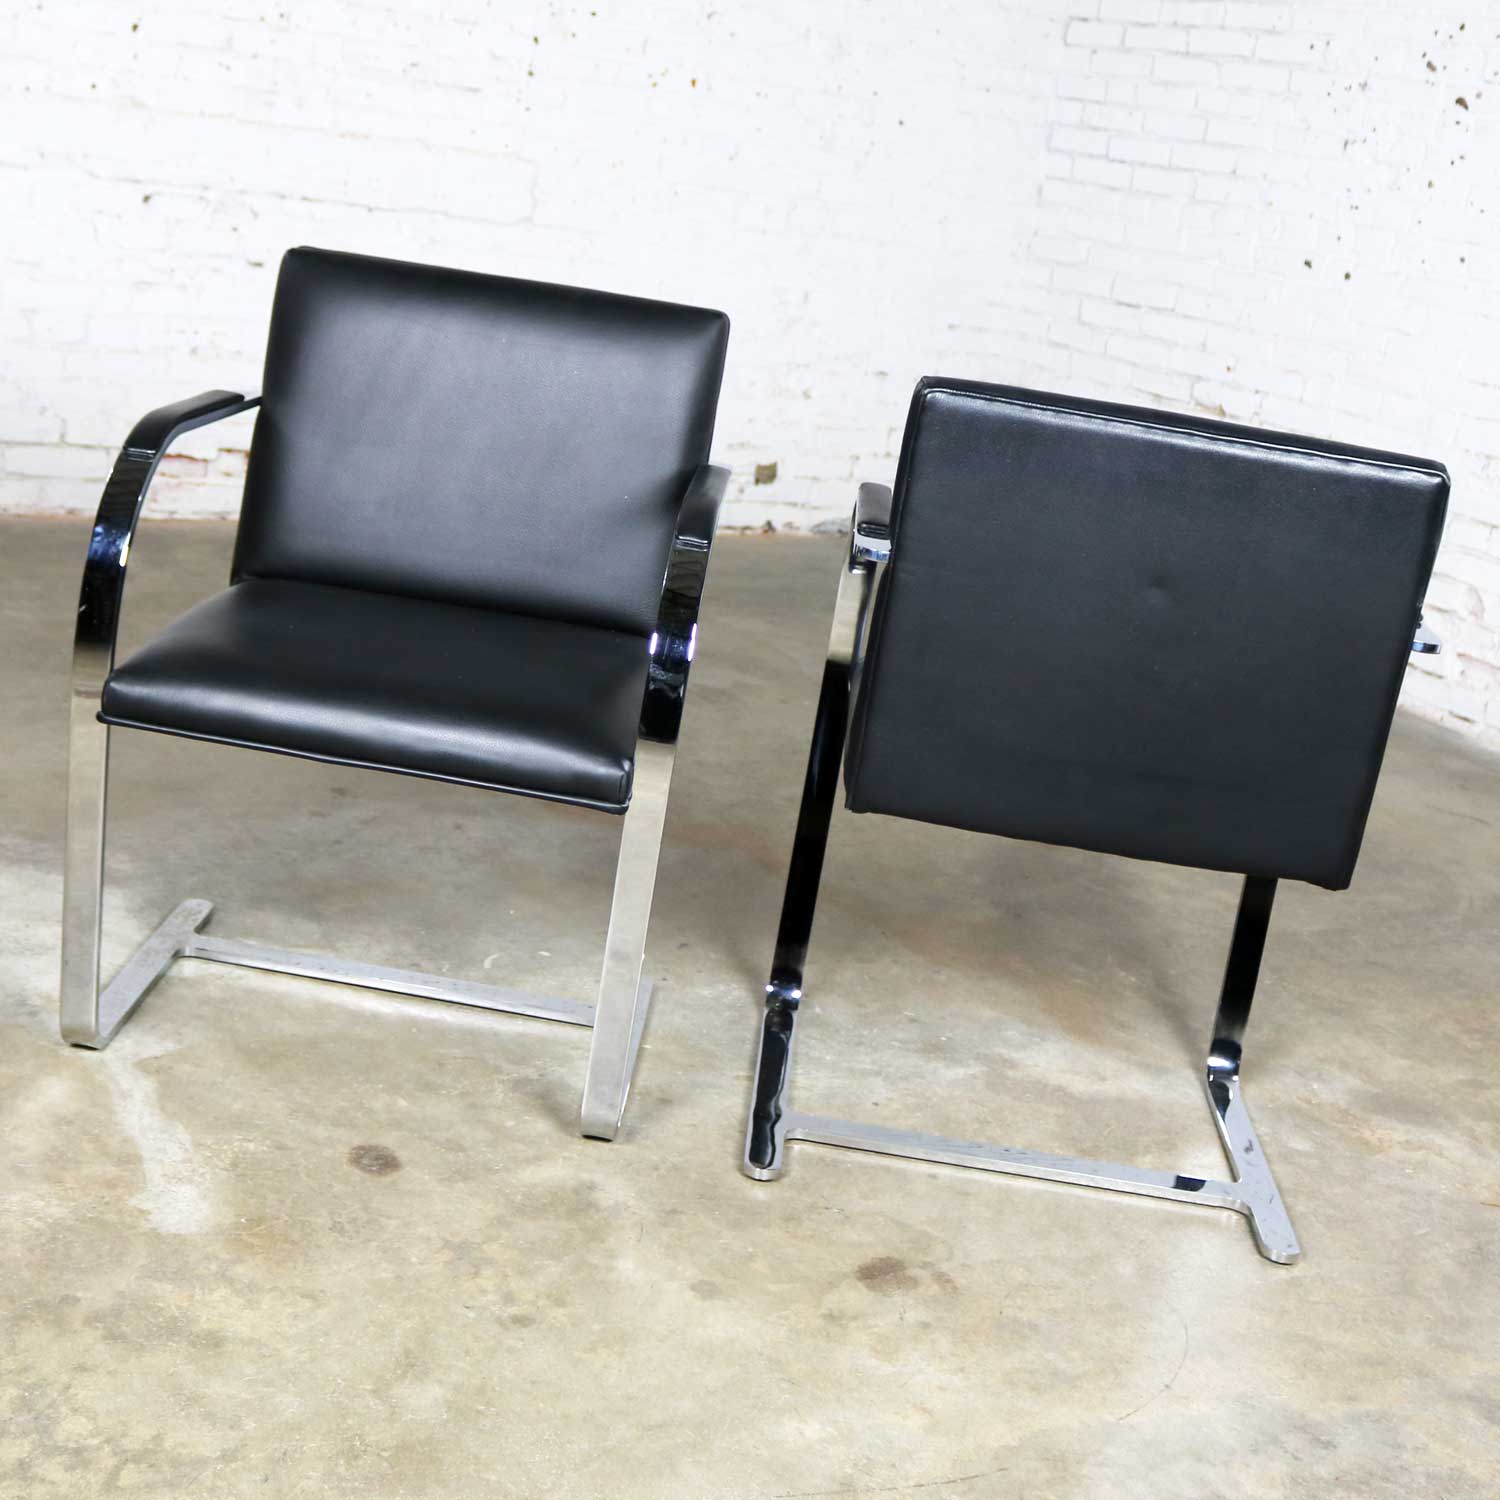 Black Leather Flat Bar Brno Chairs by Mies Van Der Rohe & Lilly Reich from Gordon Intl